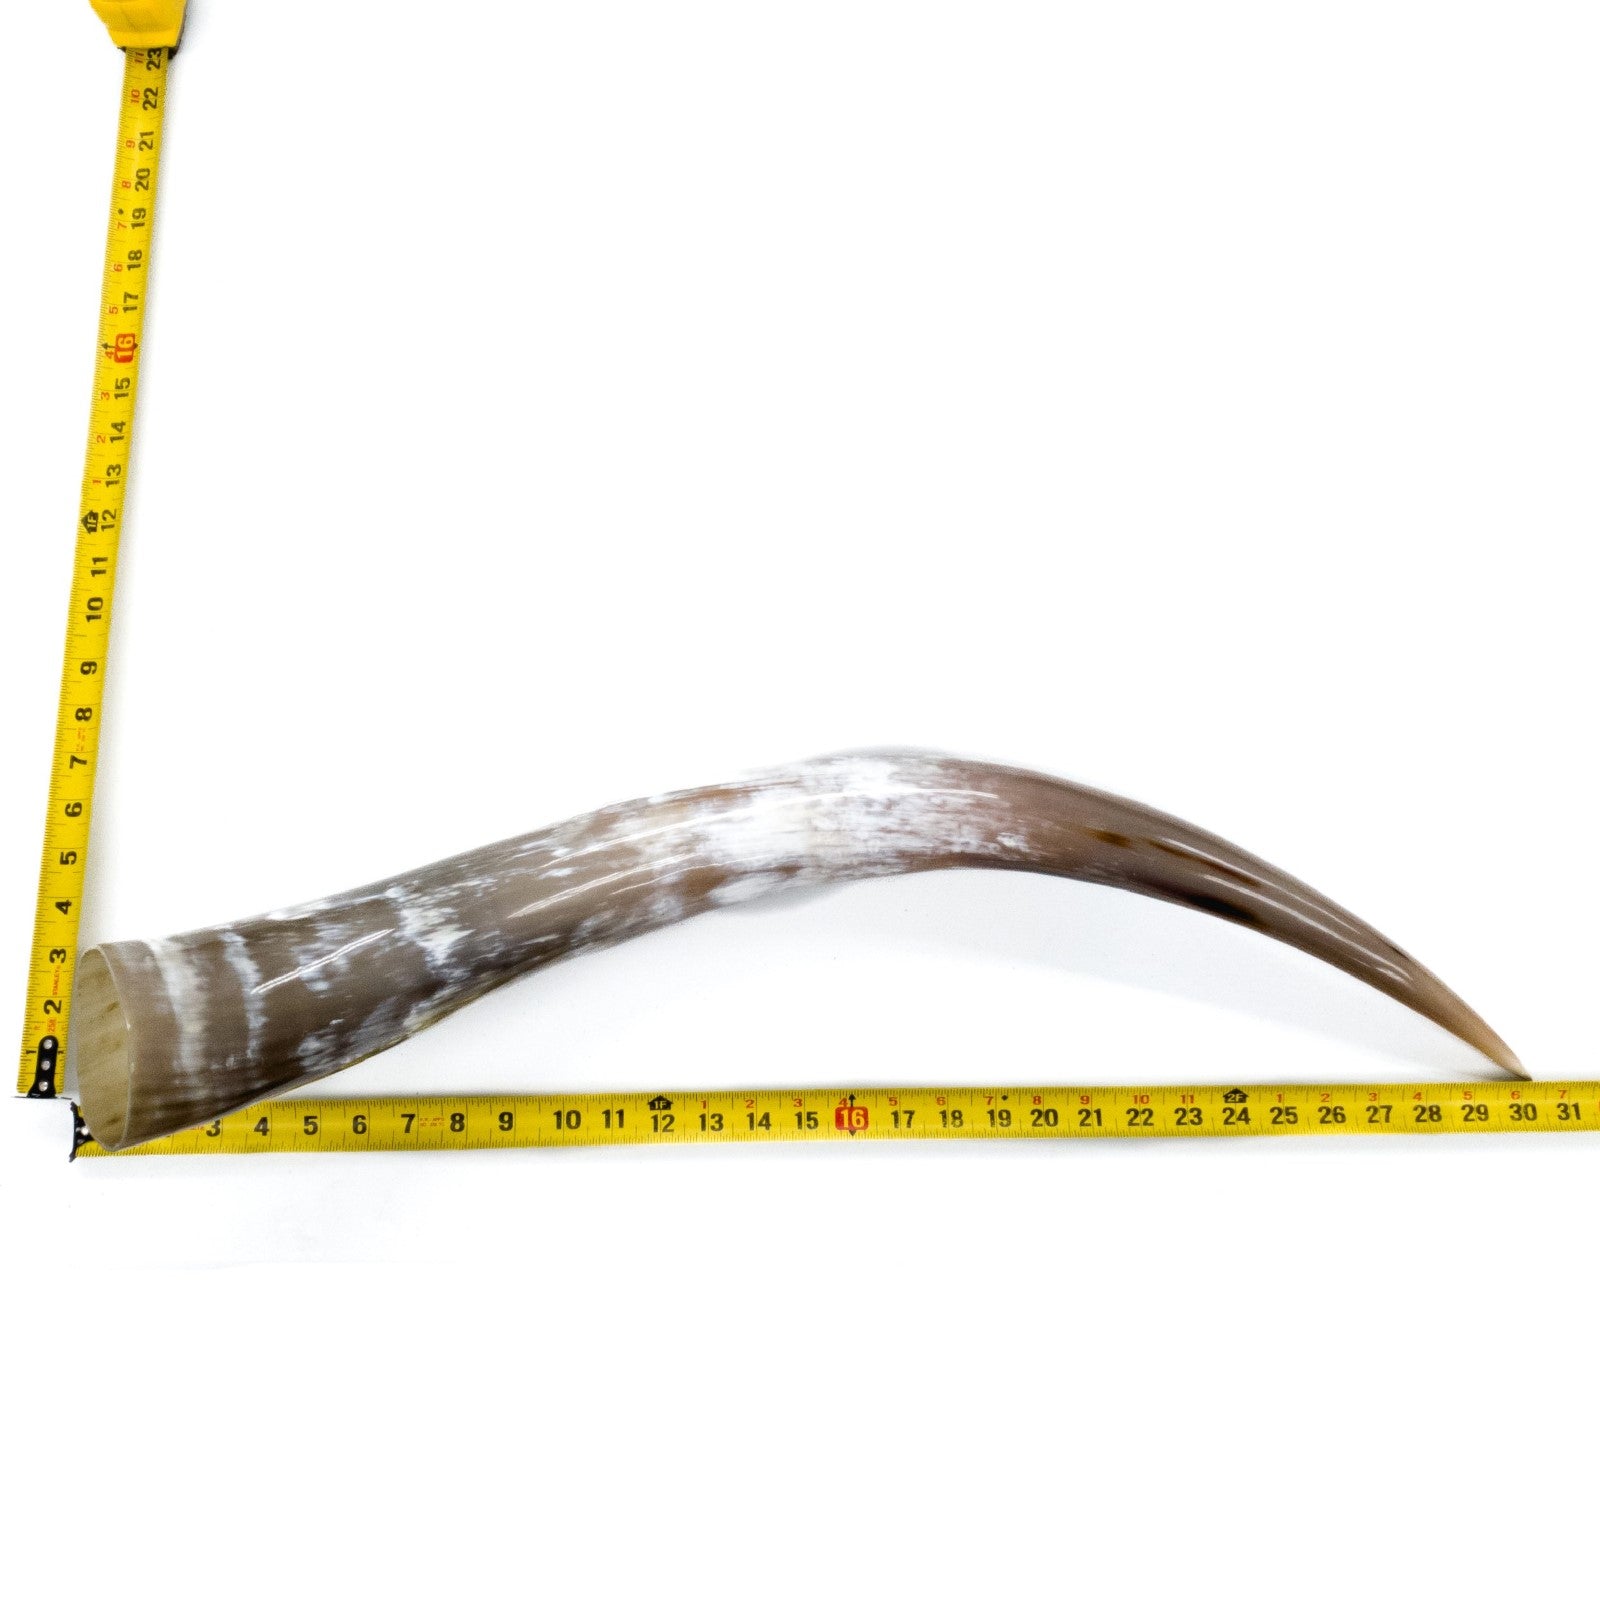 24" - 30" Single Polished Cow Horns, 2 (30") | The Leather Guy